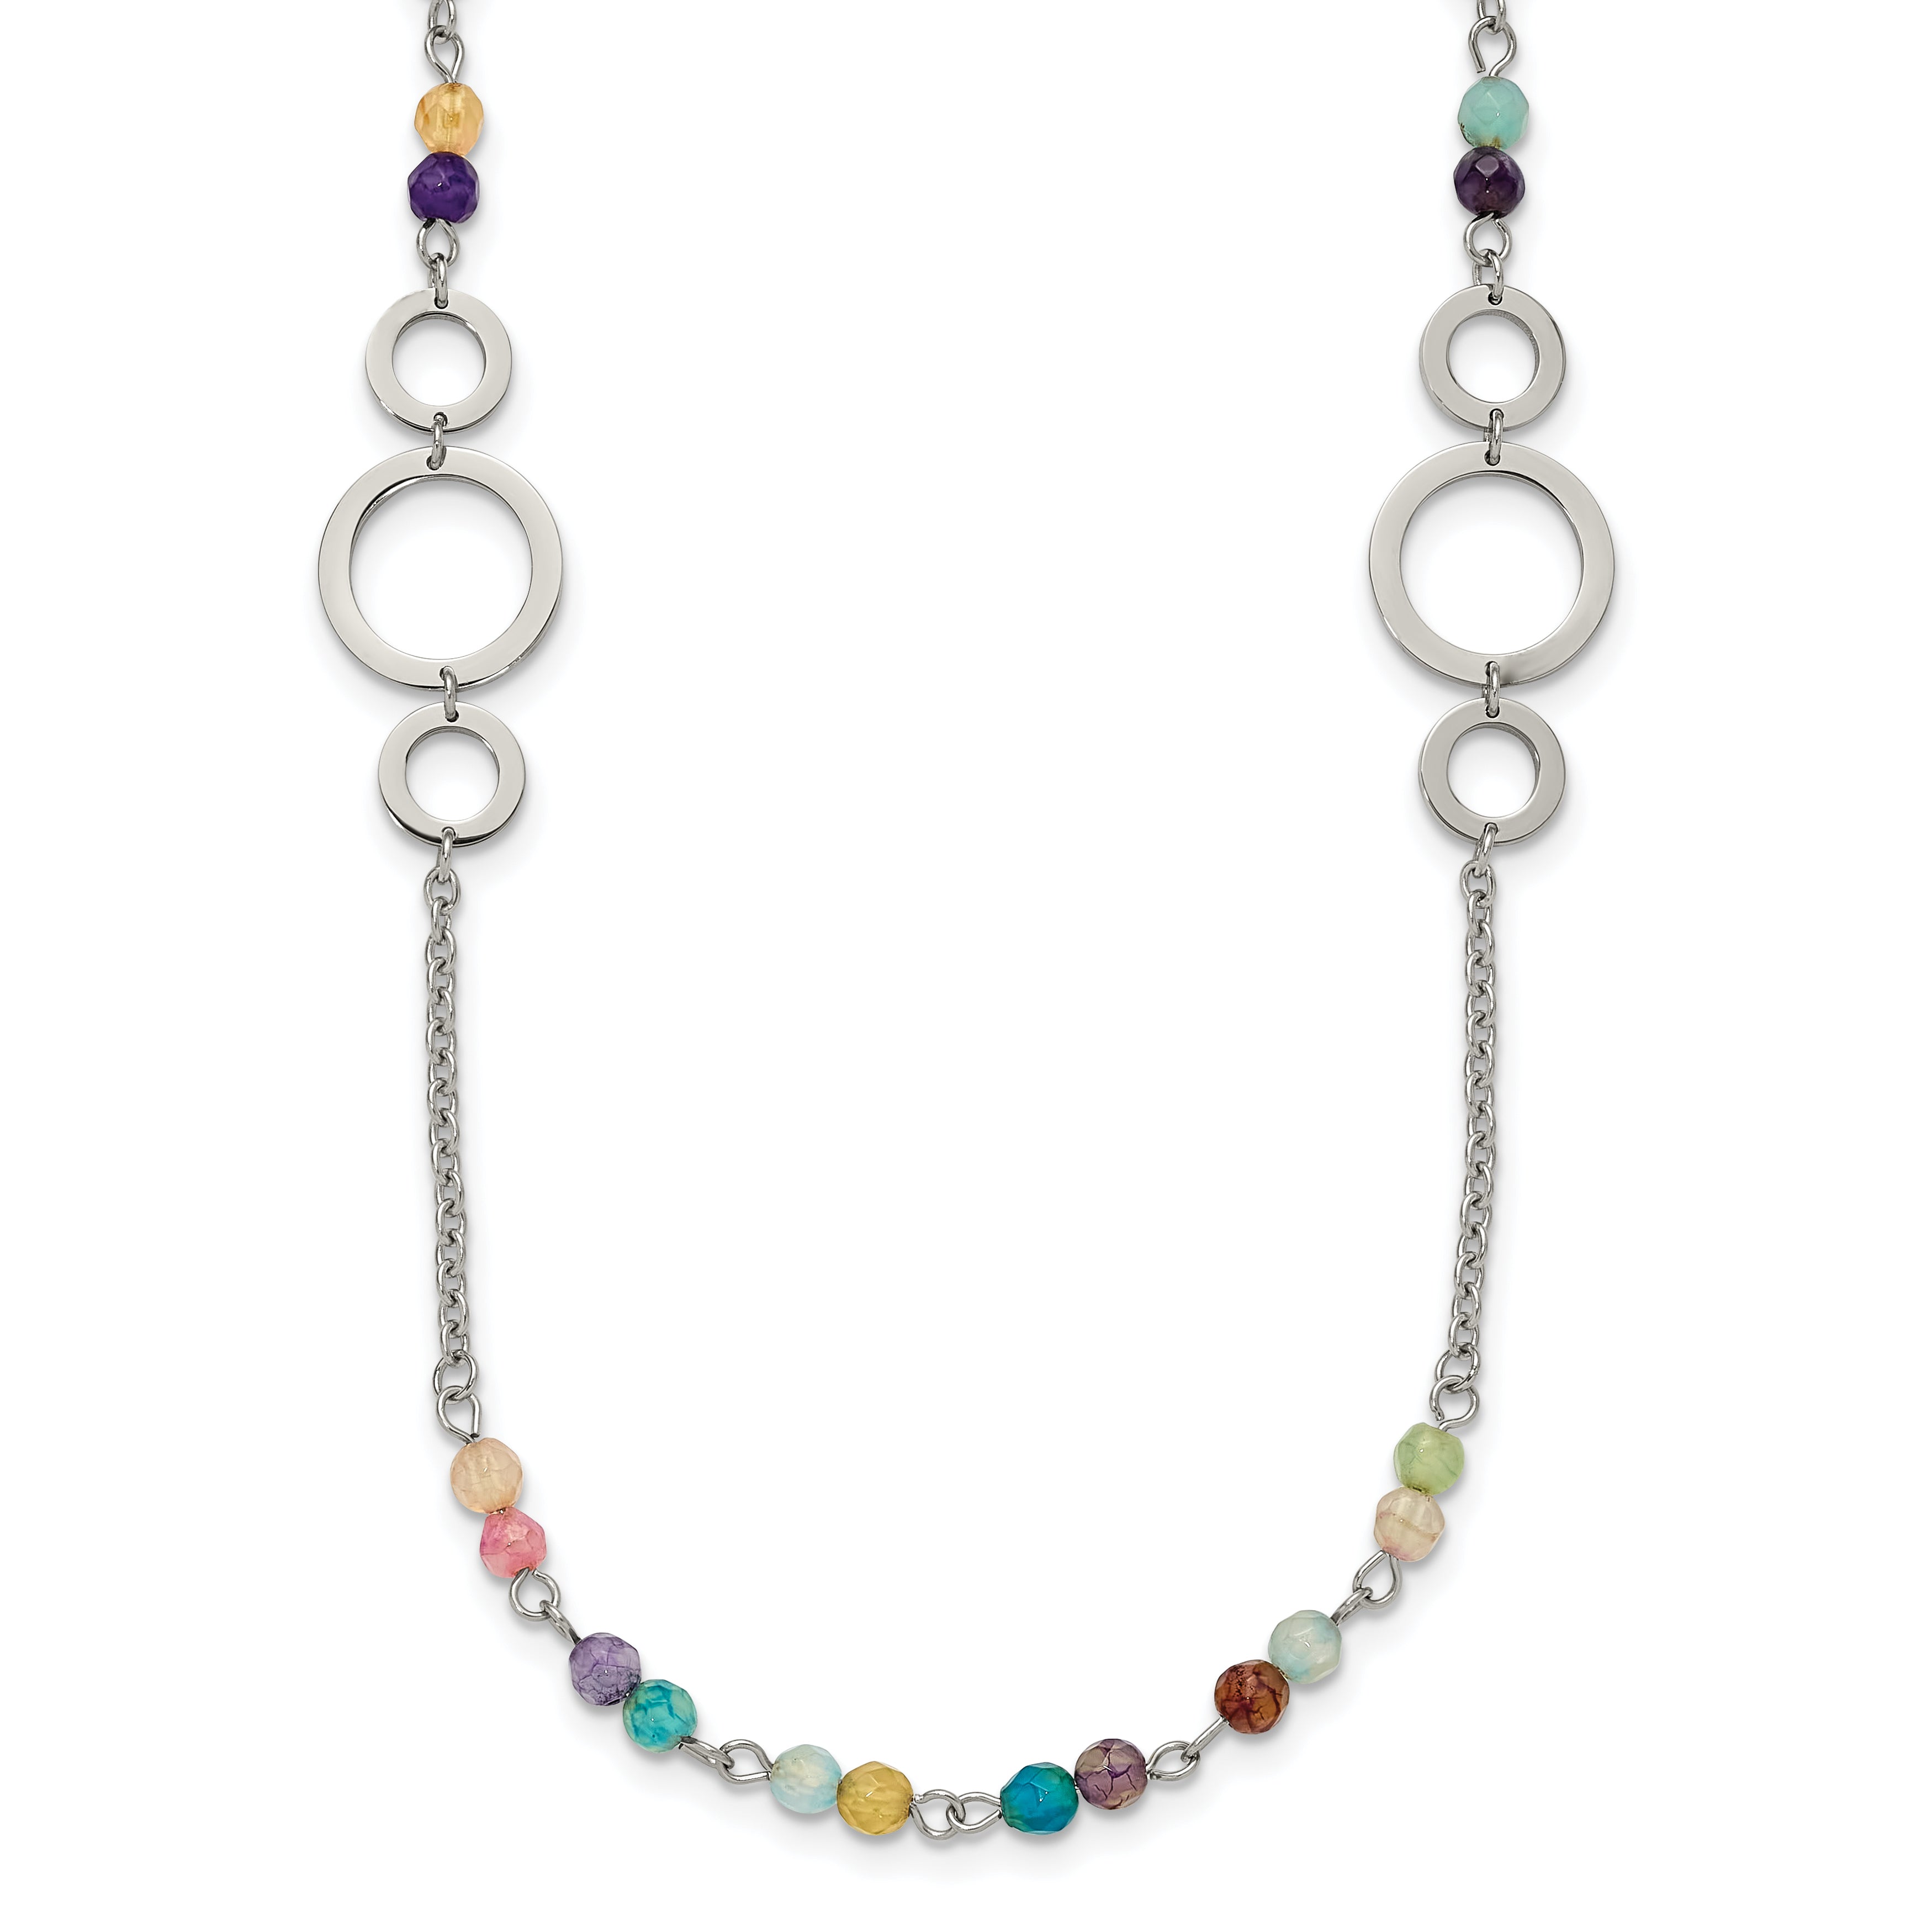 Chisel Stainless Steel Polished with Multi-colored Agate Beaded 35.5 inch Necklace